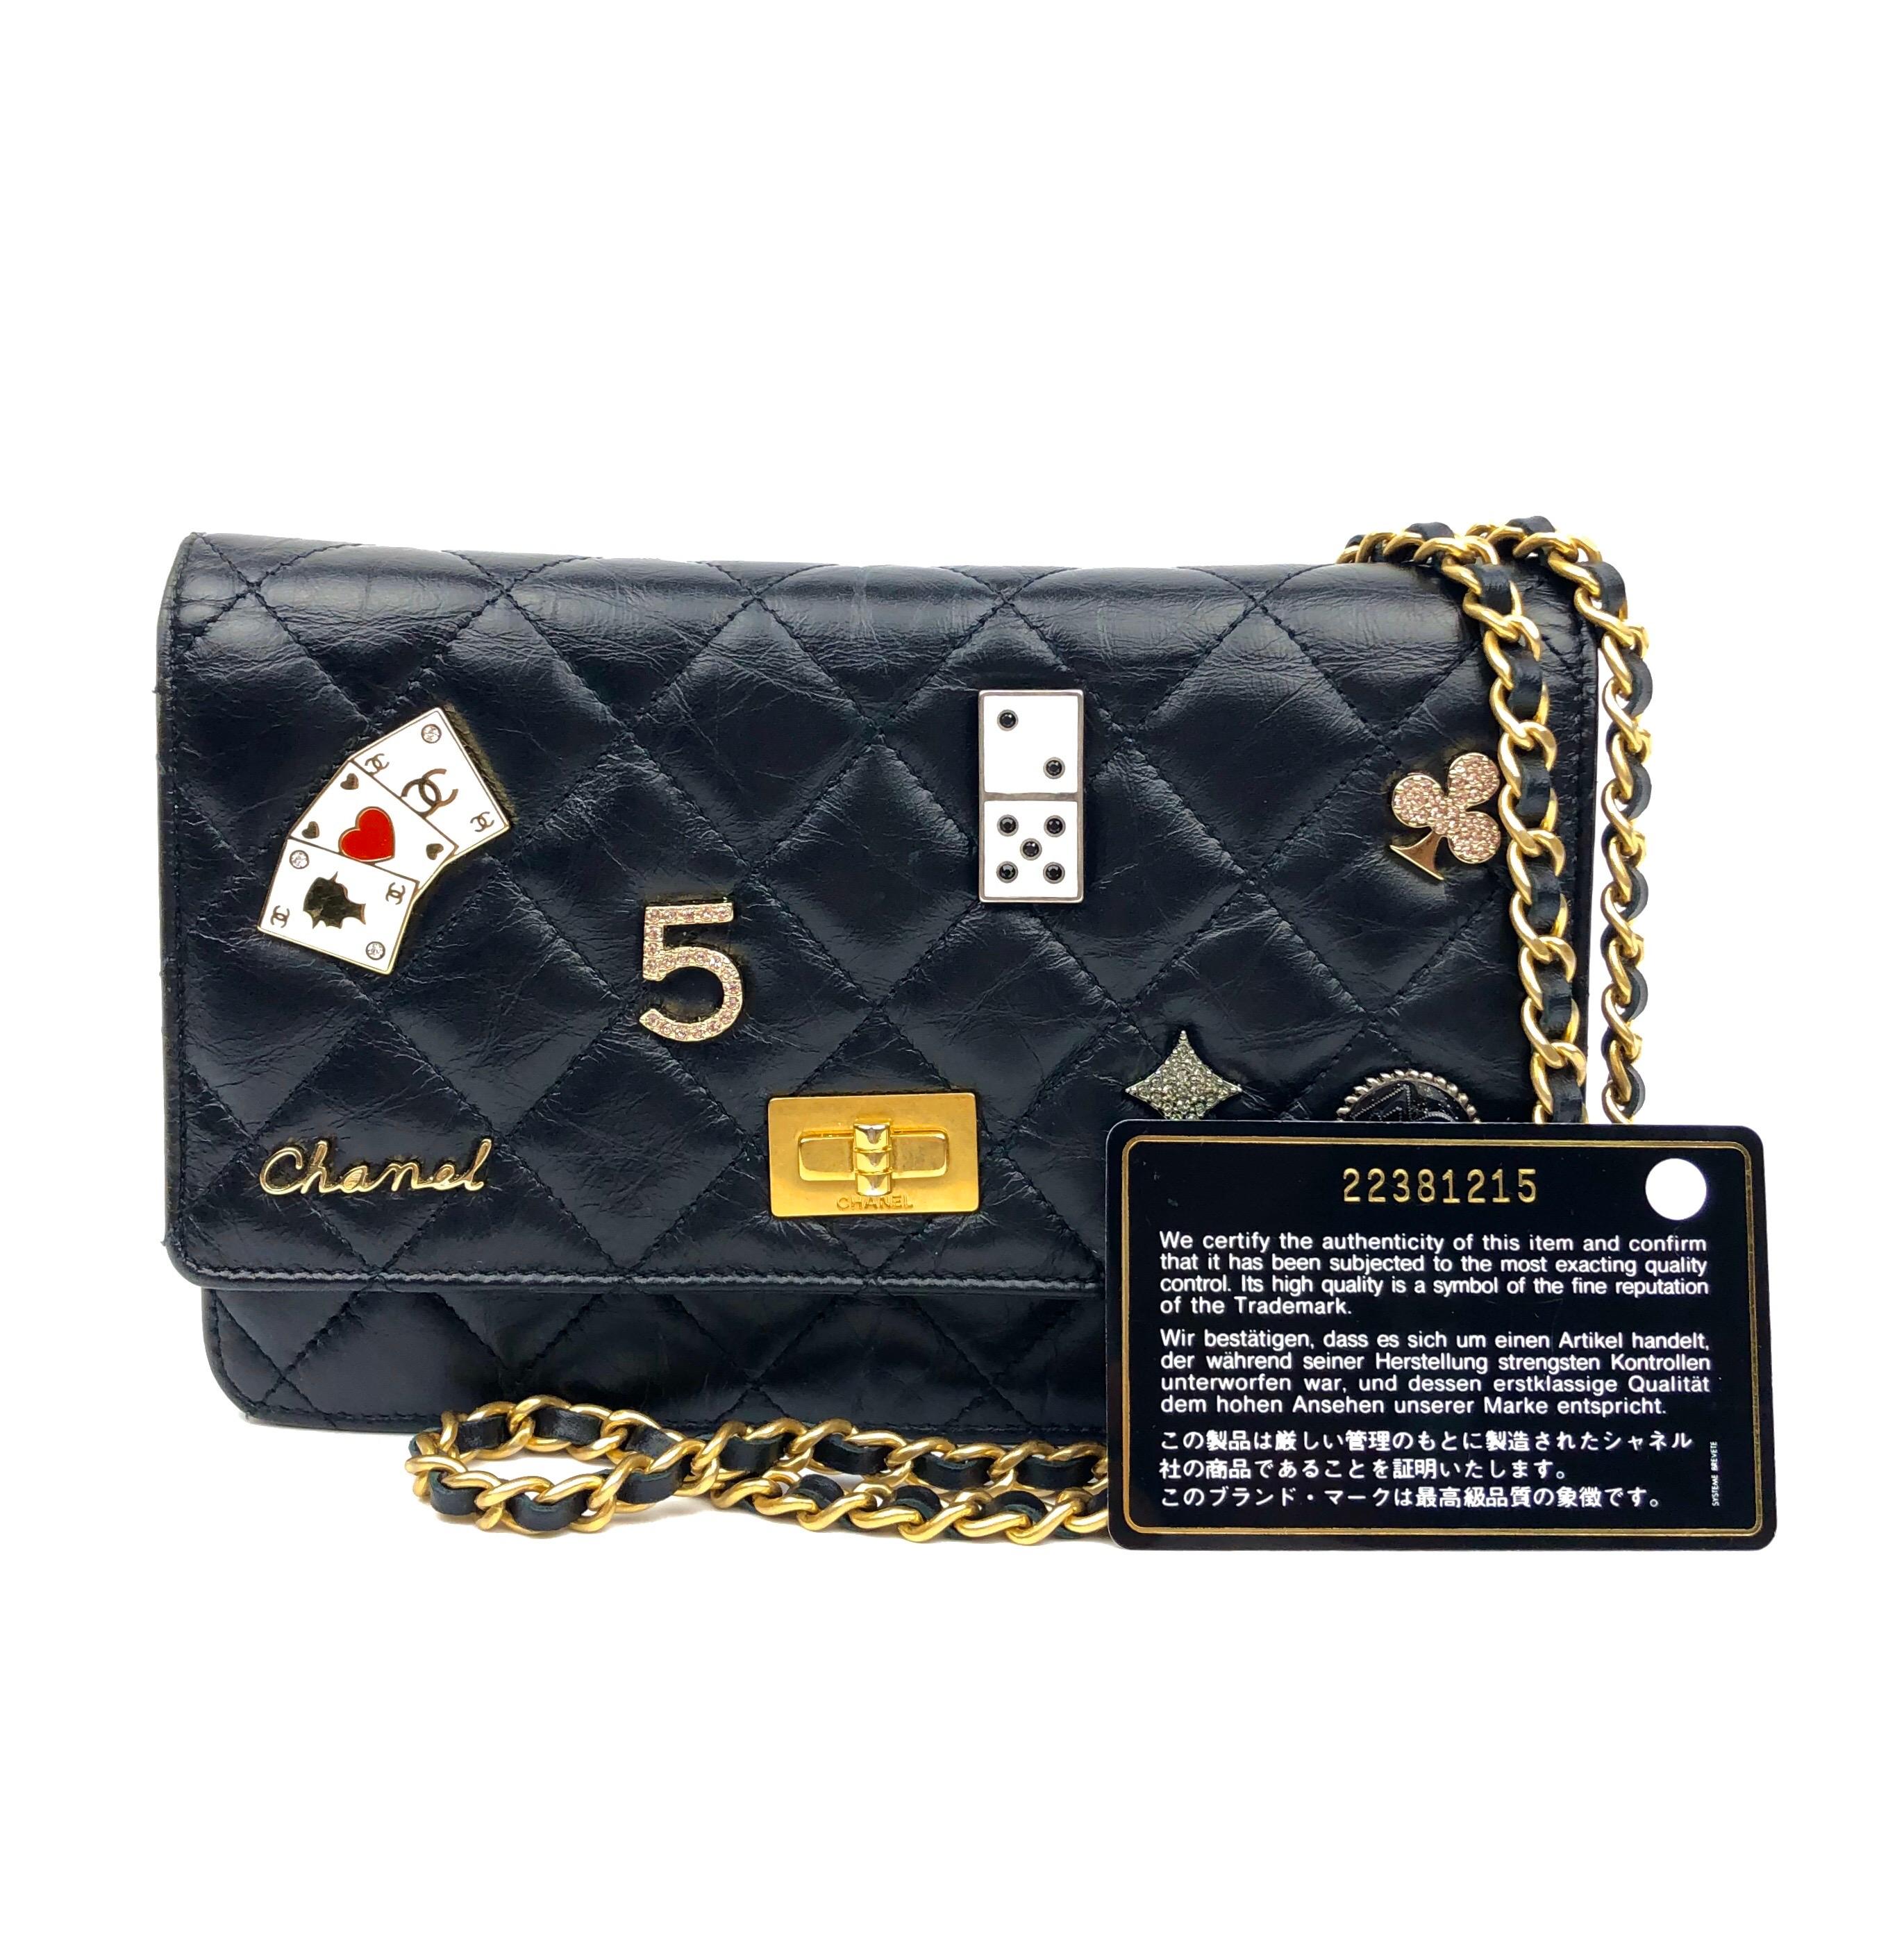 Chanel WOC Reissue 2.55 Black Lucky Charms Casino Aged Calfskin Wallet On Chain. Pristine Condition, full set with box.

Shop with Confidence from Lux Addicts. Authenticity Guaranteed! 